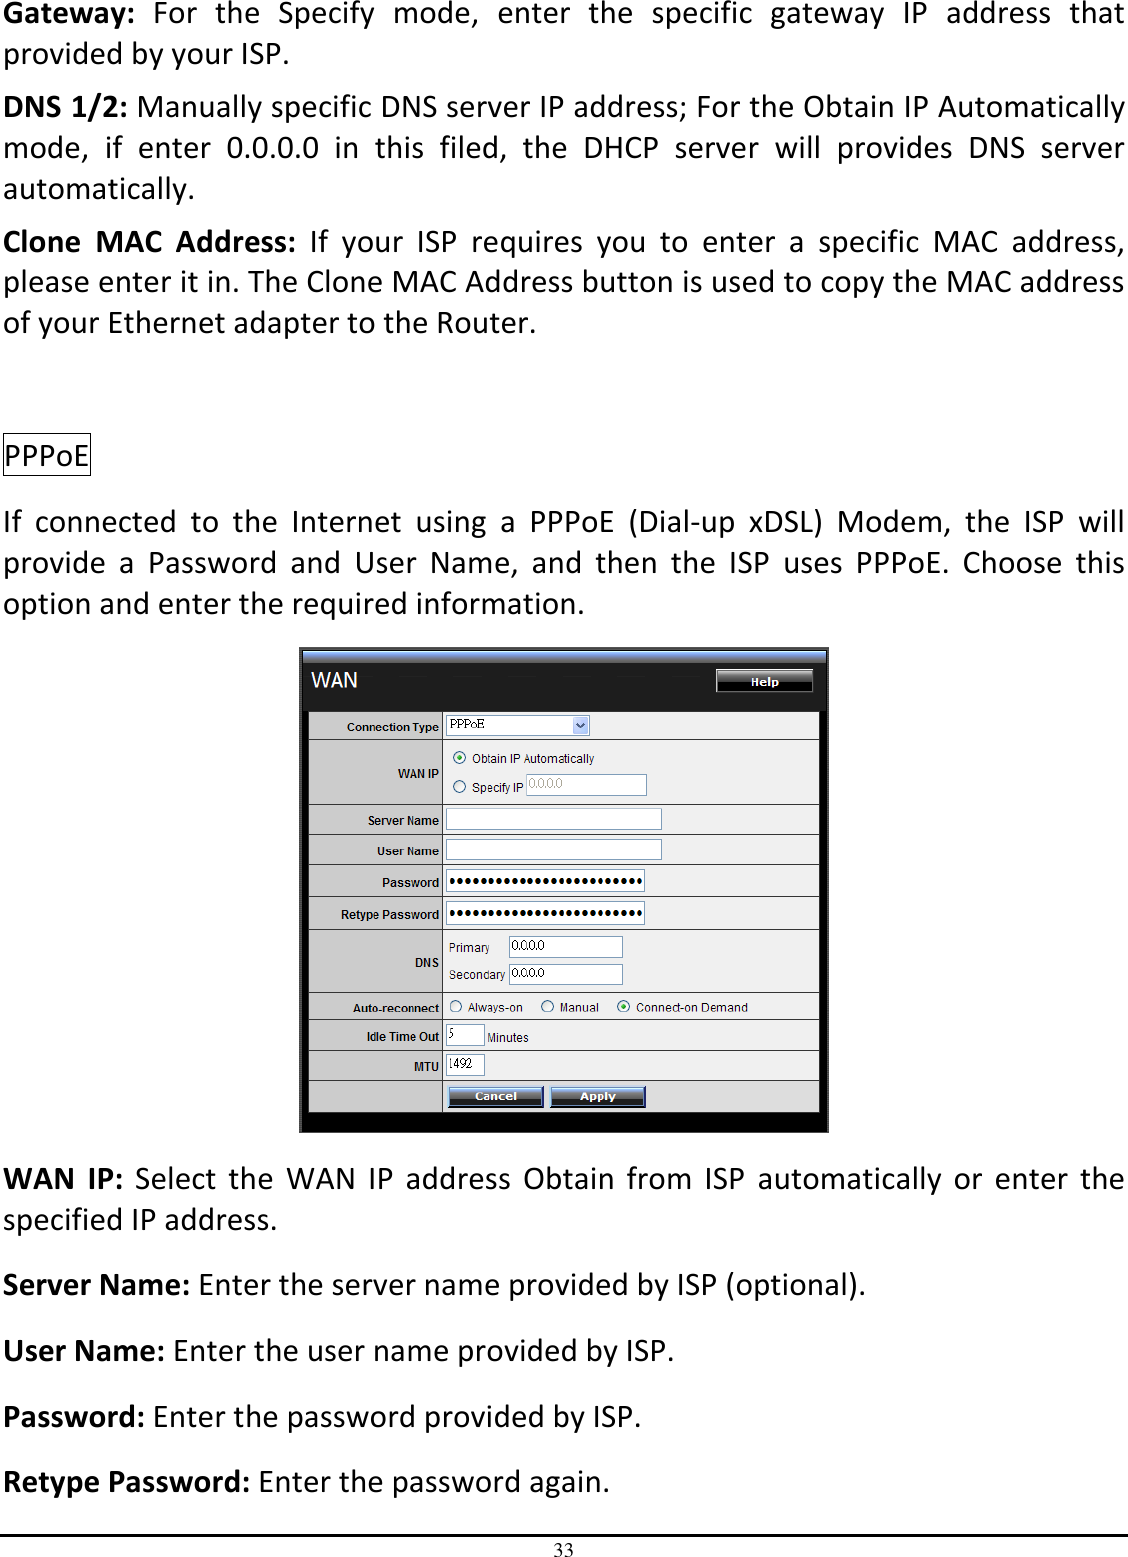 33 Gateway:  For  the  Specify  mode,  enter  the  specific  gateway  IP  address  that provided by your ISP. DNS 1/2: Manually specific DNS server IP address; For the Obtain IP Automatically mode,  if  enter  0.0.0.0  in  this  filed,  the  DHCP  server  will  provides  DNS  server automatically. Clone  MAC  Address:  If  your  ISP  requires  you  to  enter  a  specific  MAC  address, please enter it in. The Clone MAC Address button is used to copy the MAC address of your Ethernet adapter to the Router.  PPPoE  If  connected  to  the  Internet  using  a  PPPoE  (Dial-up  xDSL)  Modem,  the  ISP  will provide  a  Password  and  User  Name,  and  then  the  ISP  uses  PPPoE.  Choose  this option and enter the required information.  WAN  IP:  Select the  WAN IP  address  Obtain  from  ISP  automatically  or  enter the specified IP address. Server Name: Enter the server name provided by ISP (optional). User Name: Enter the user name provided by ISP. Password: Enter the password provided by ISP. Retype Password: Enter the password again. 